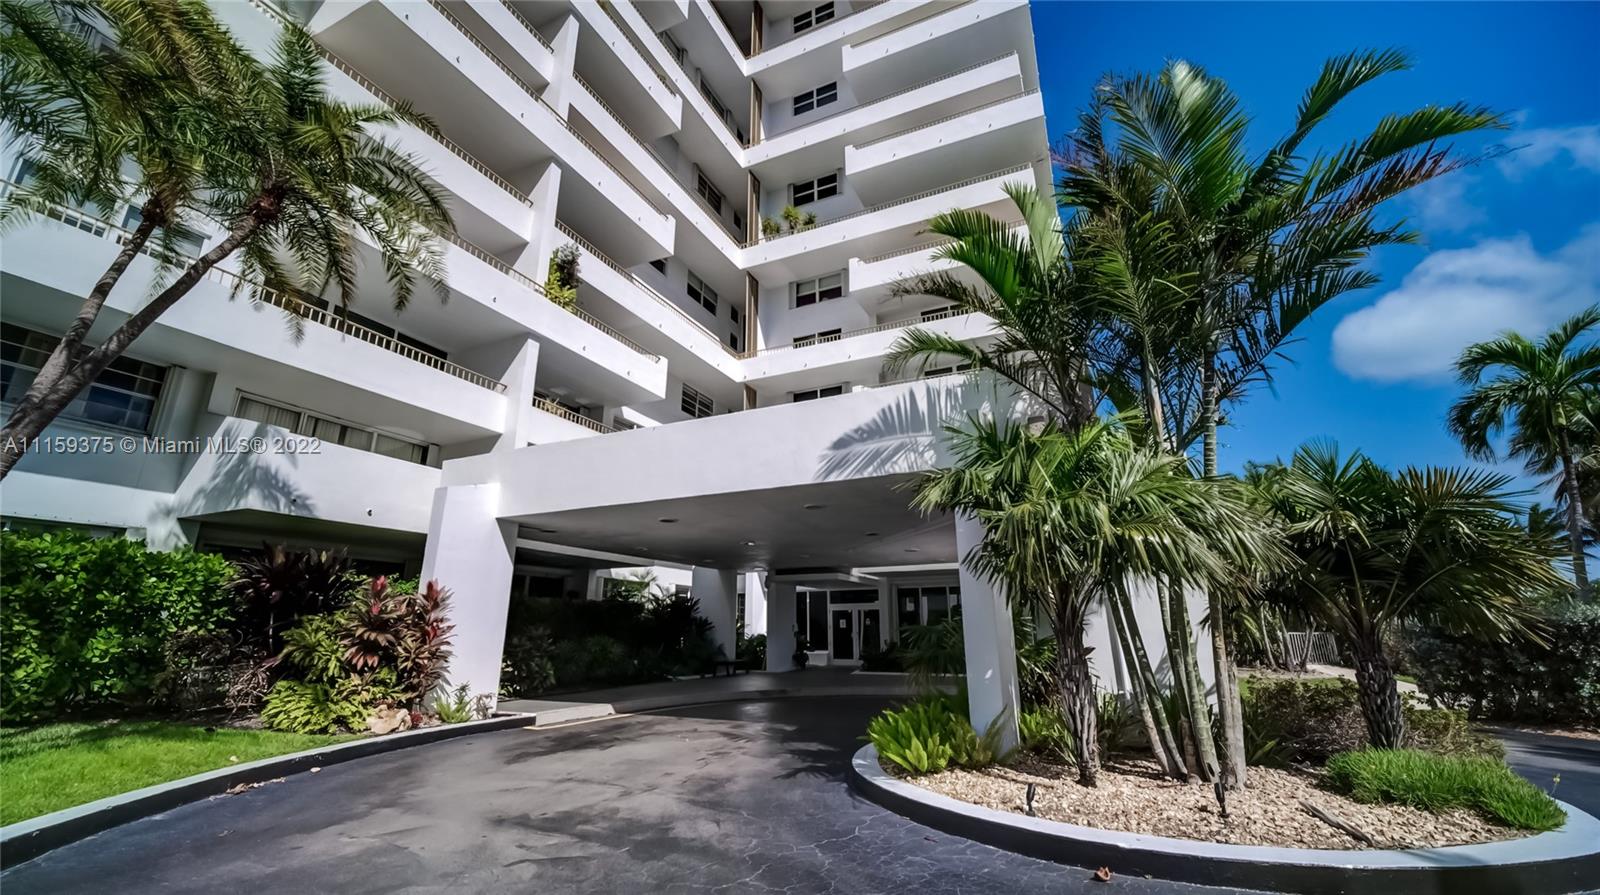 Photo 1 of Key Biscaynes Commodore C Apt 812 in Key Biscayne - MLS A11159375